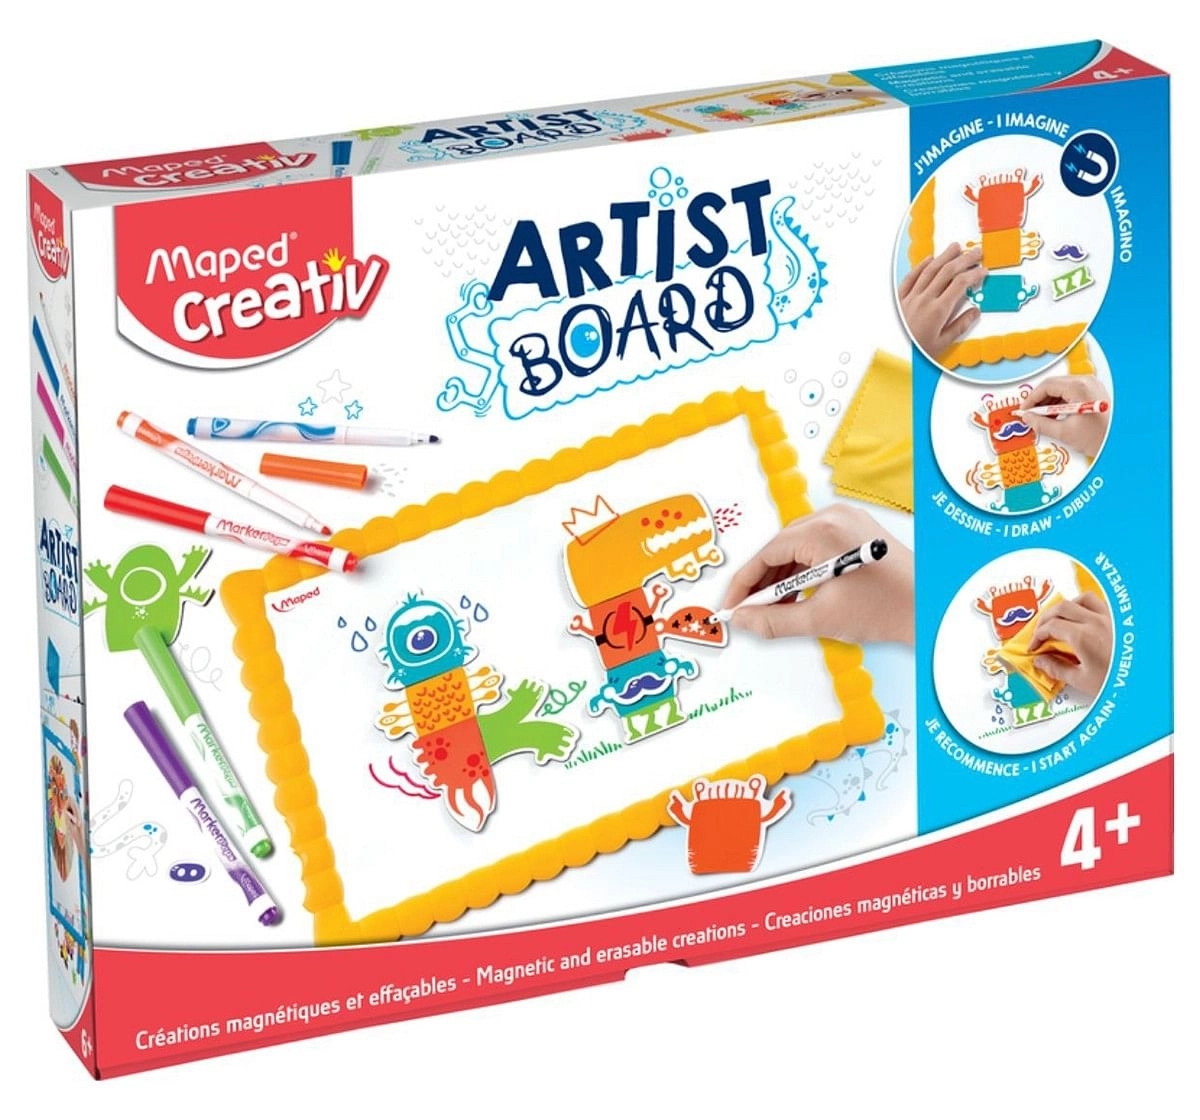 Maped Magnetic Erasable Creations, 7Y+ (Multicolour)